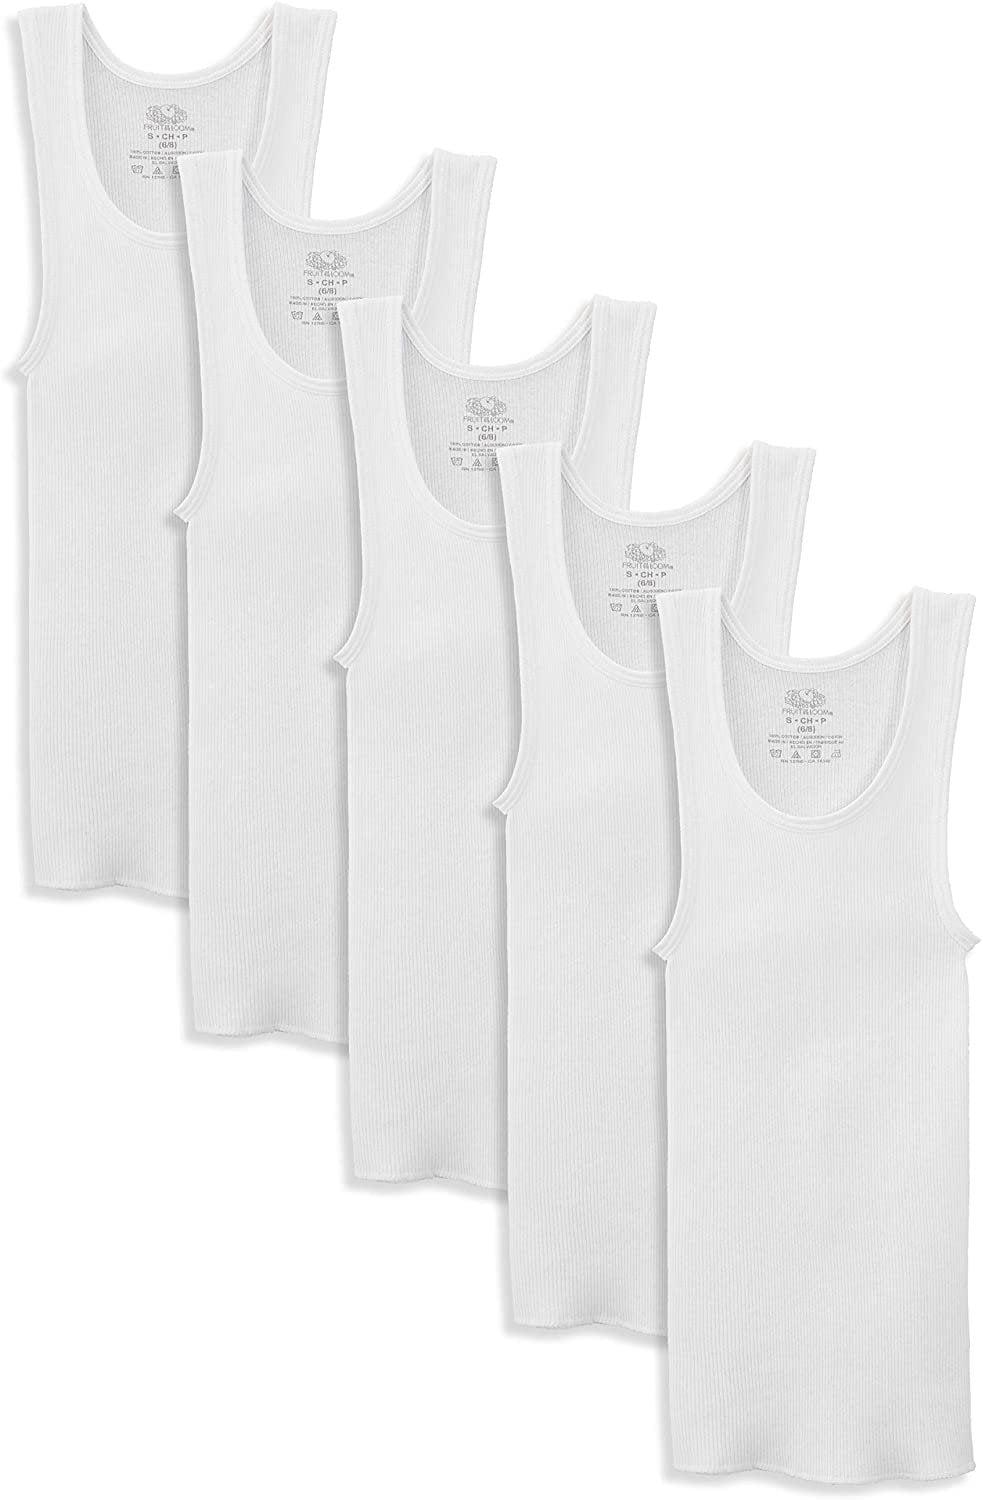 Fruit of the Loom Boys Undershirts, 5 Pack White Cotton Tank Tops ...